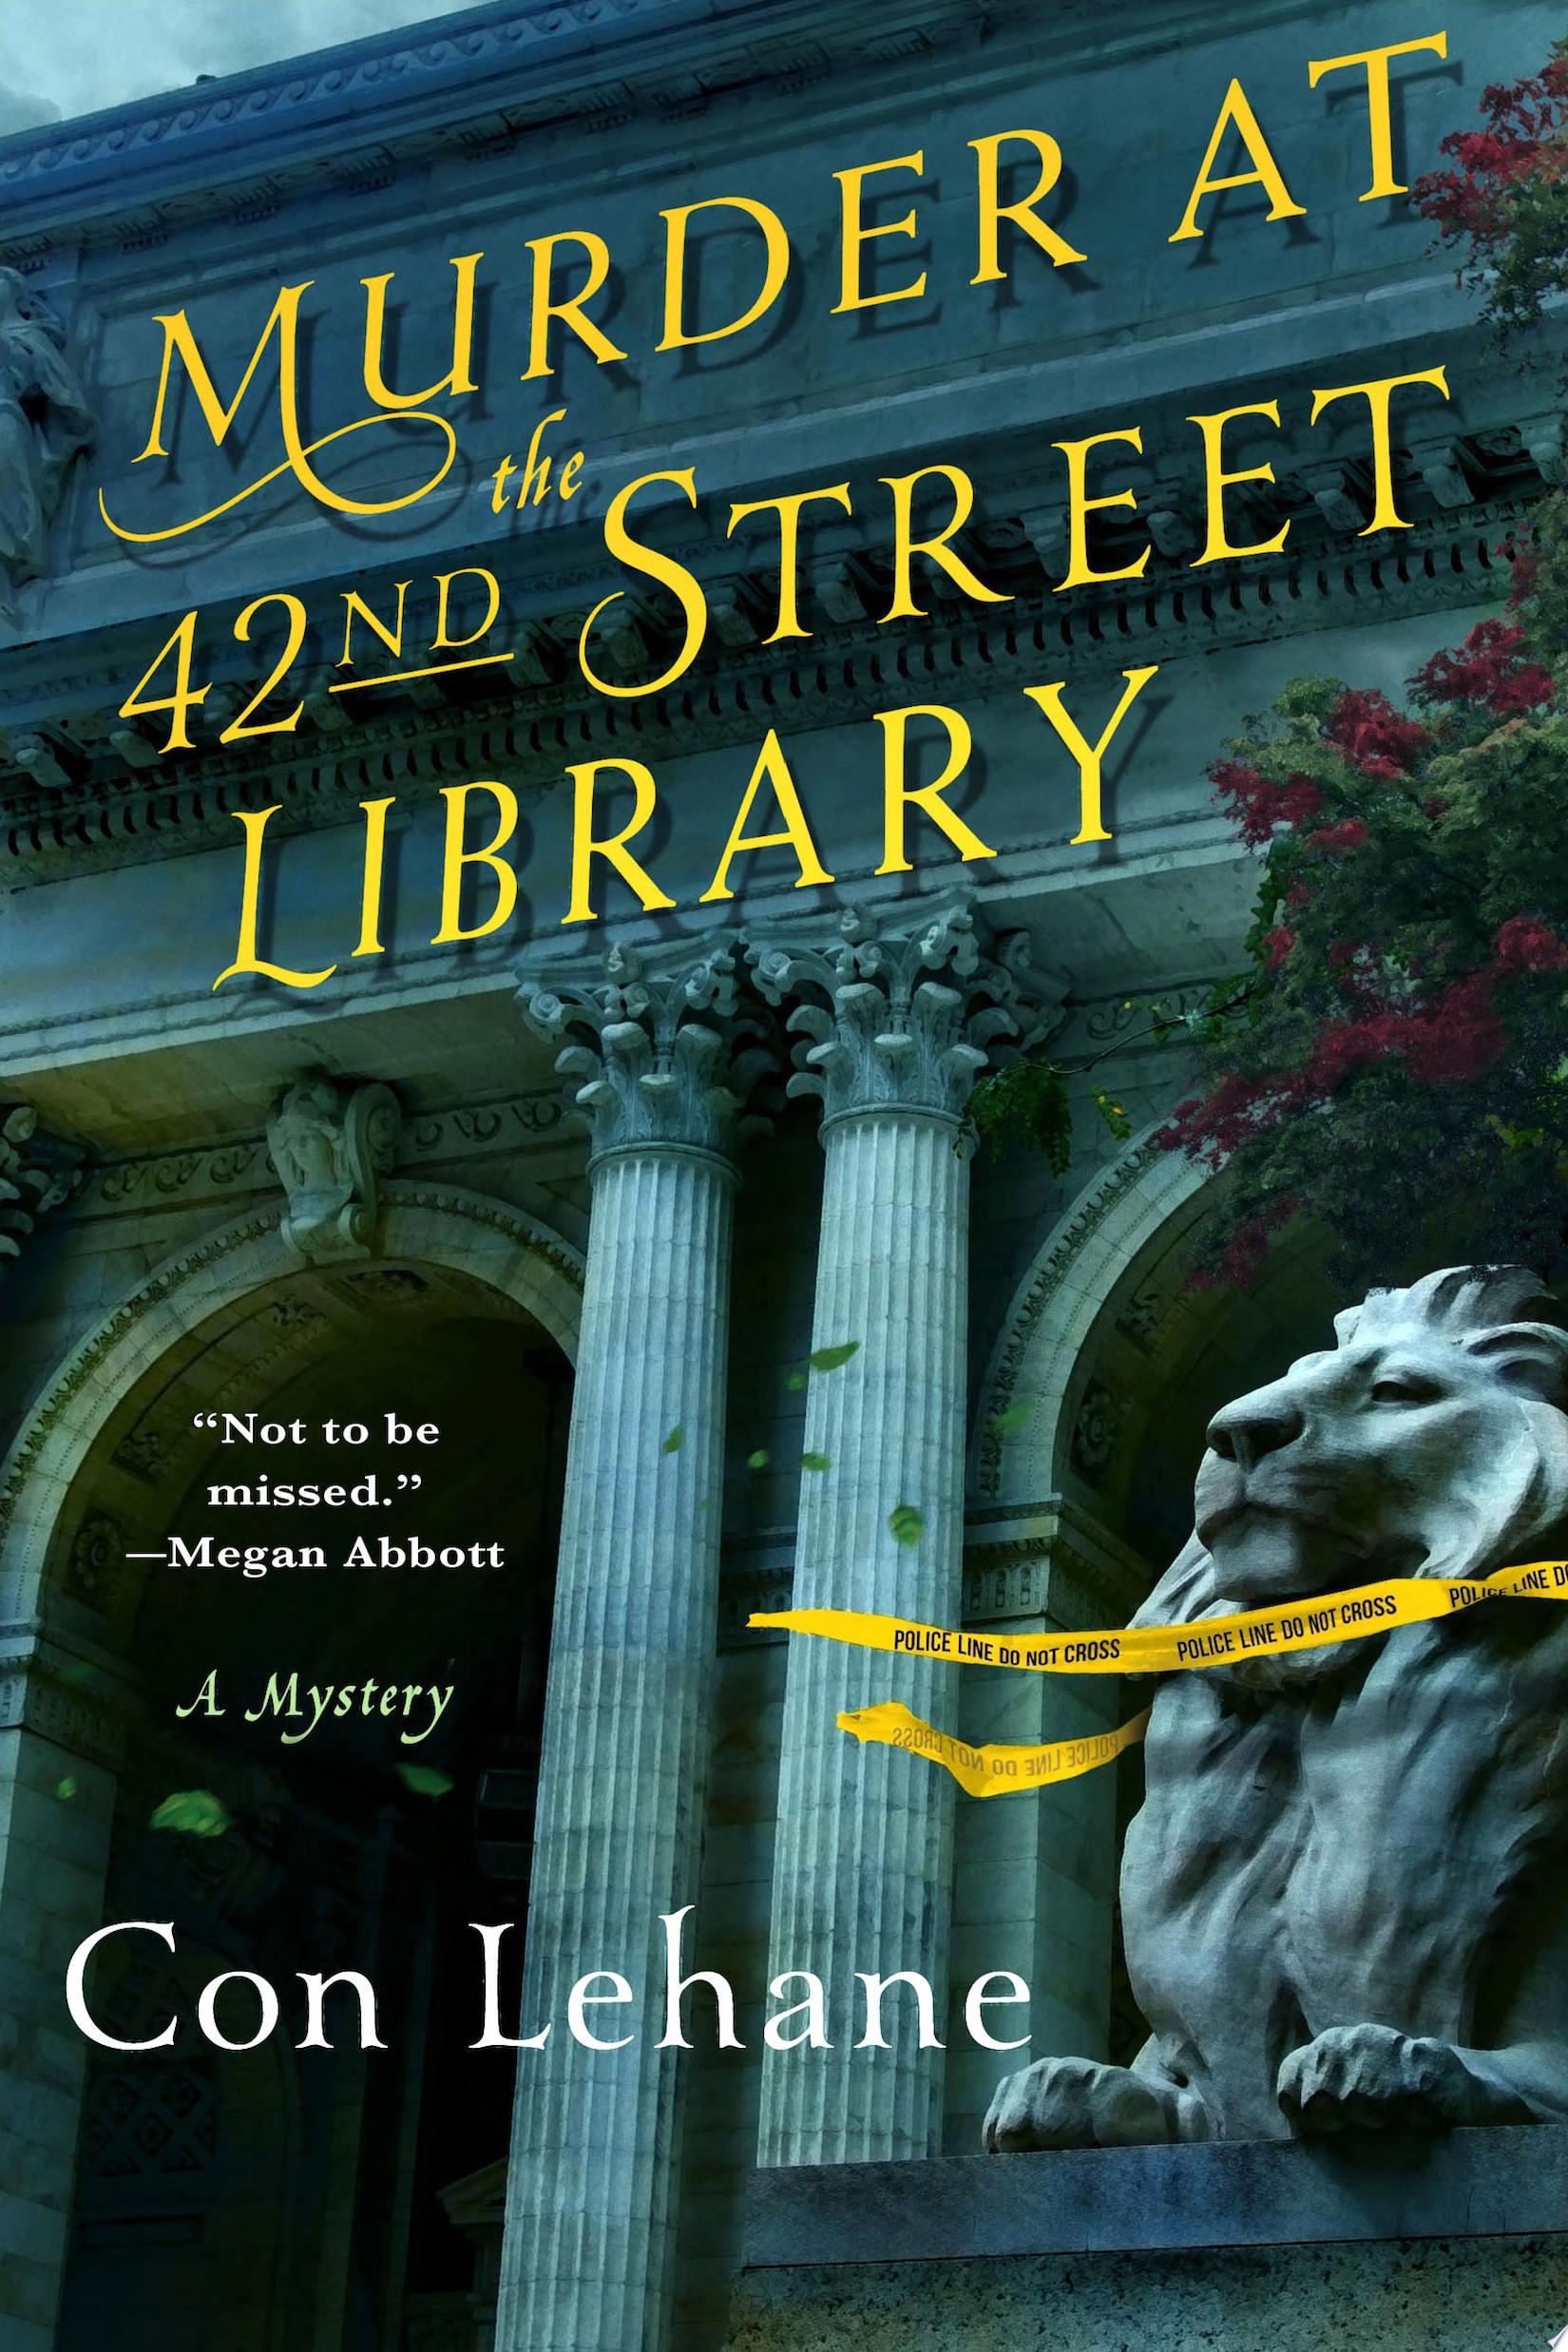 Image for "Murder at the 42nd Street Library"